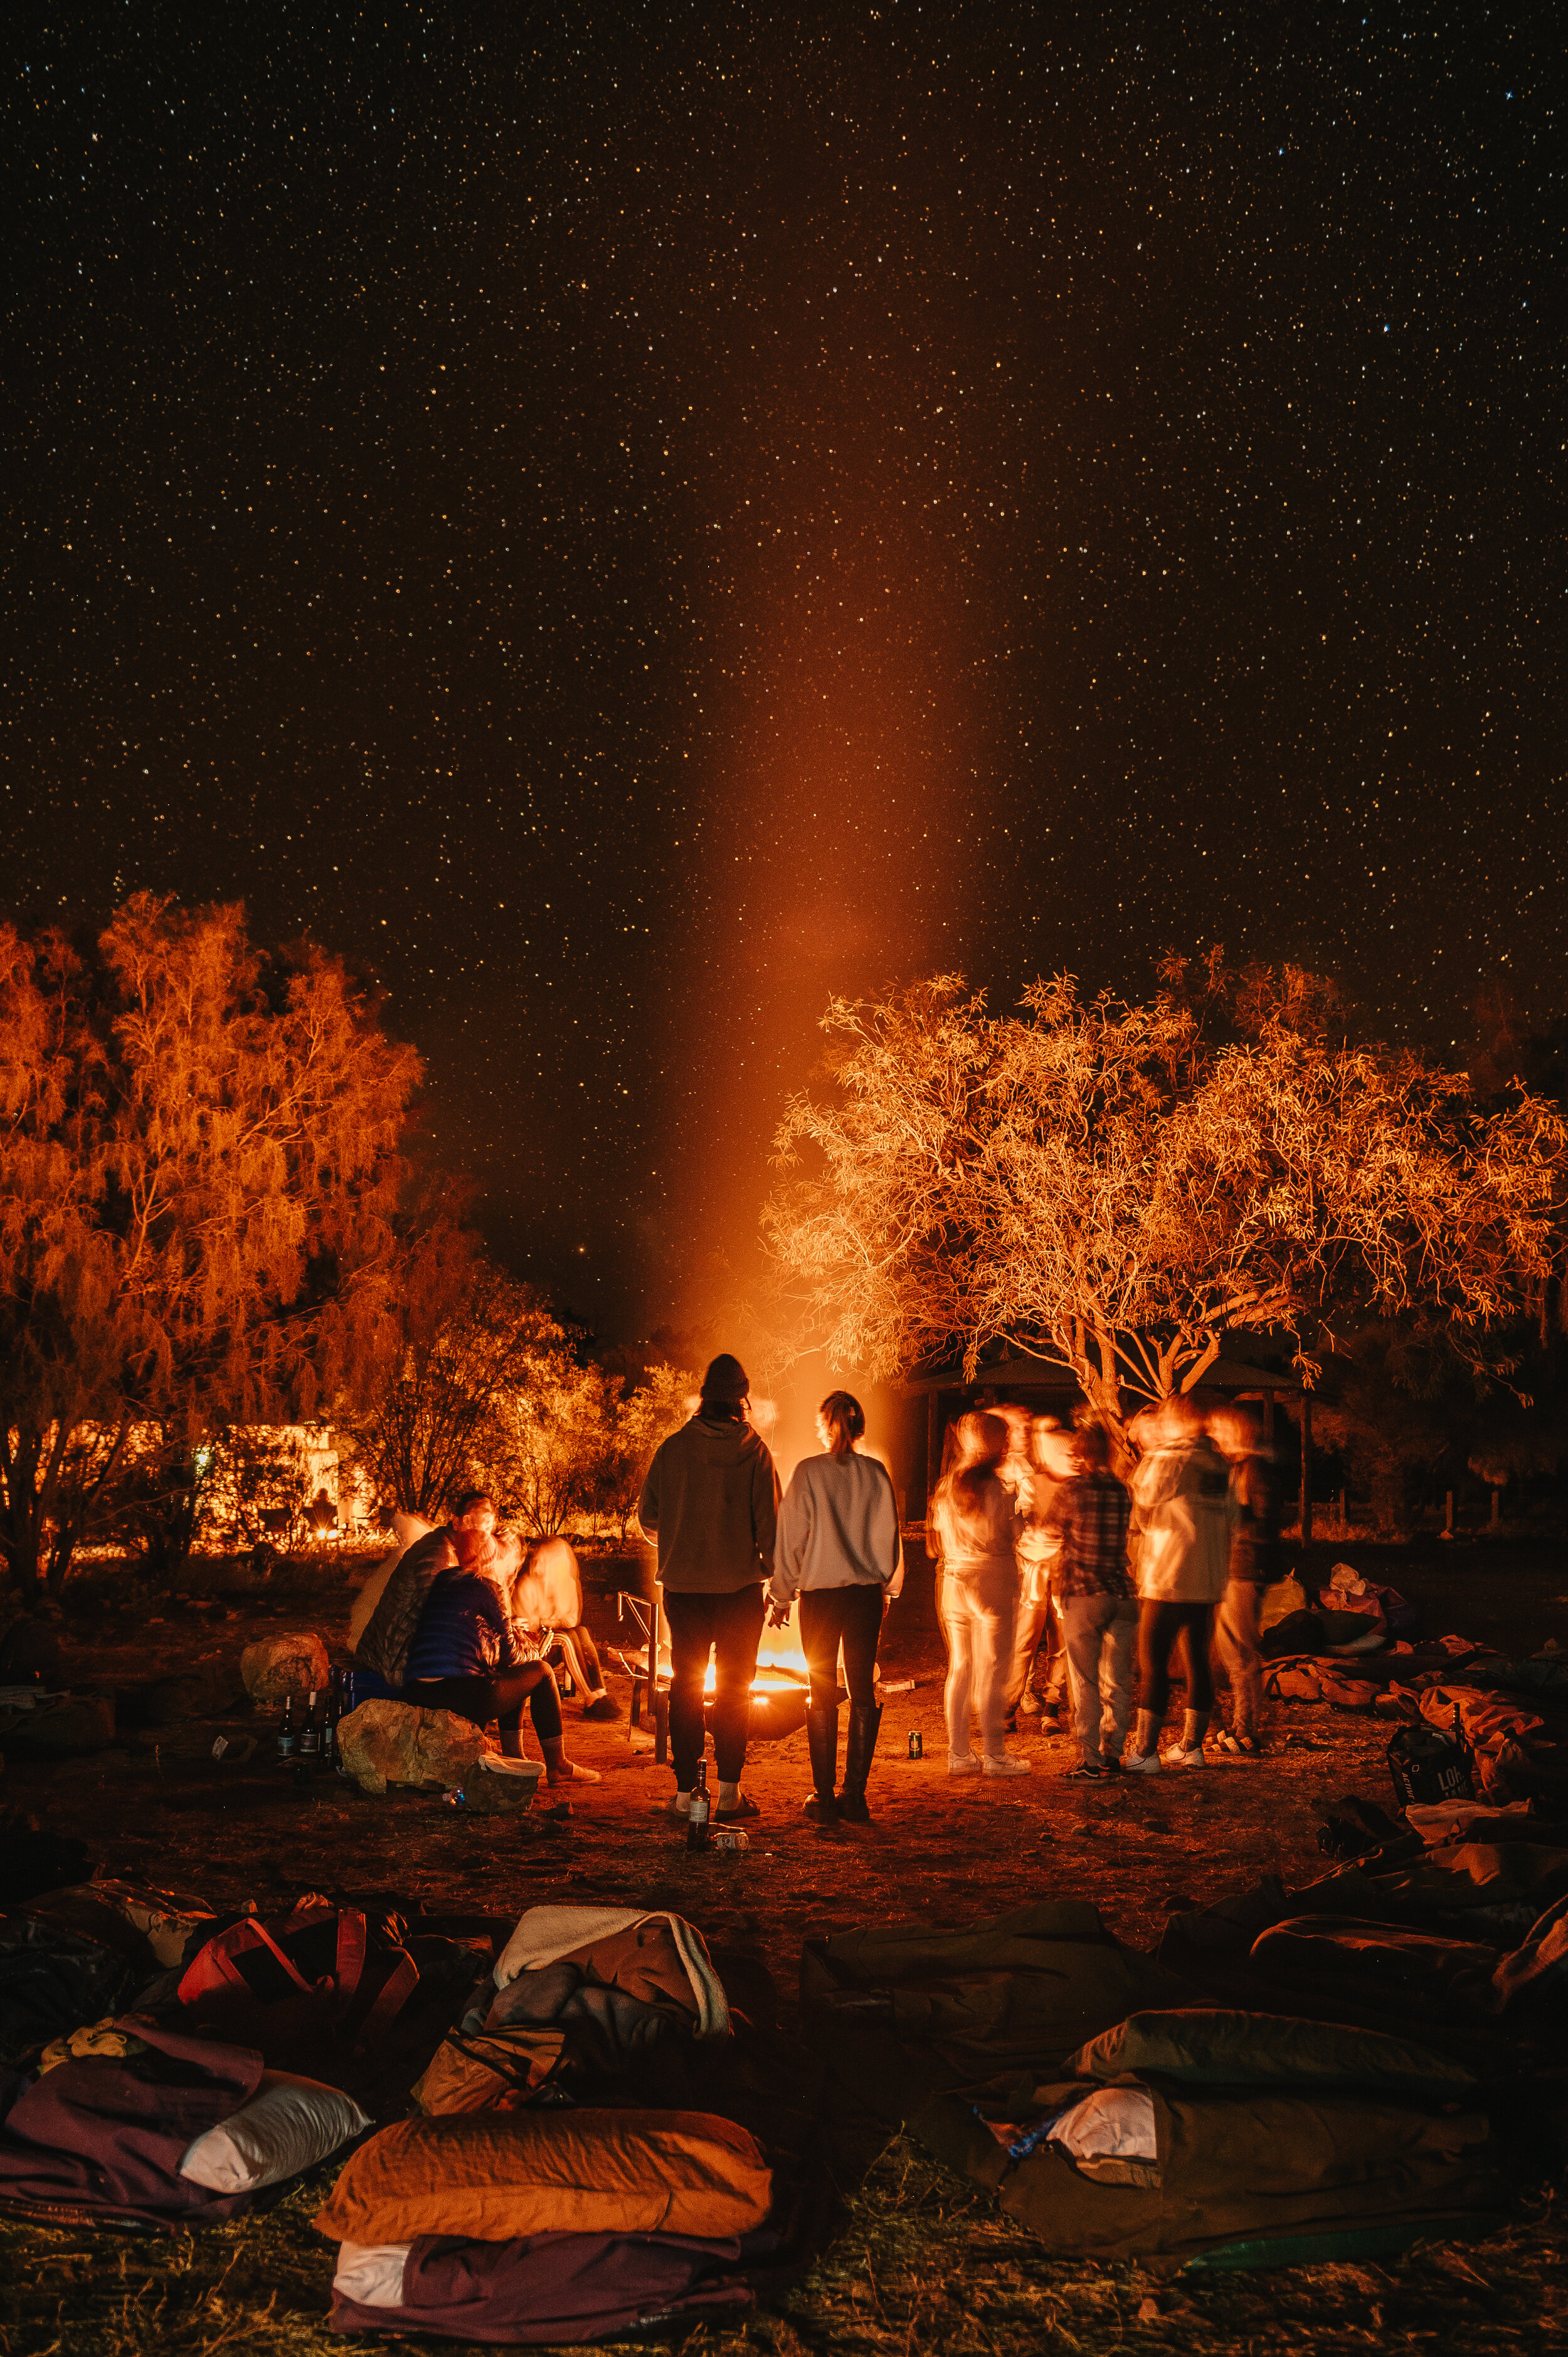 Rian Cope Photography - Watching the stars by the campfire - Ellery Creek - West MacDonnell Ranges - Northern Territory - Australia